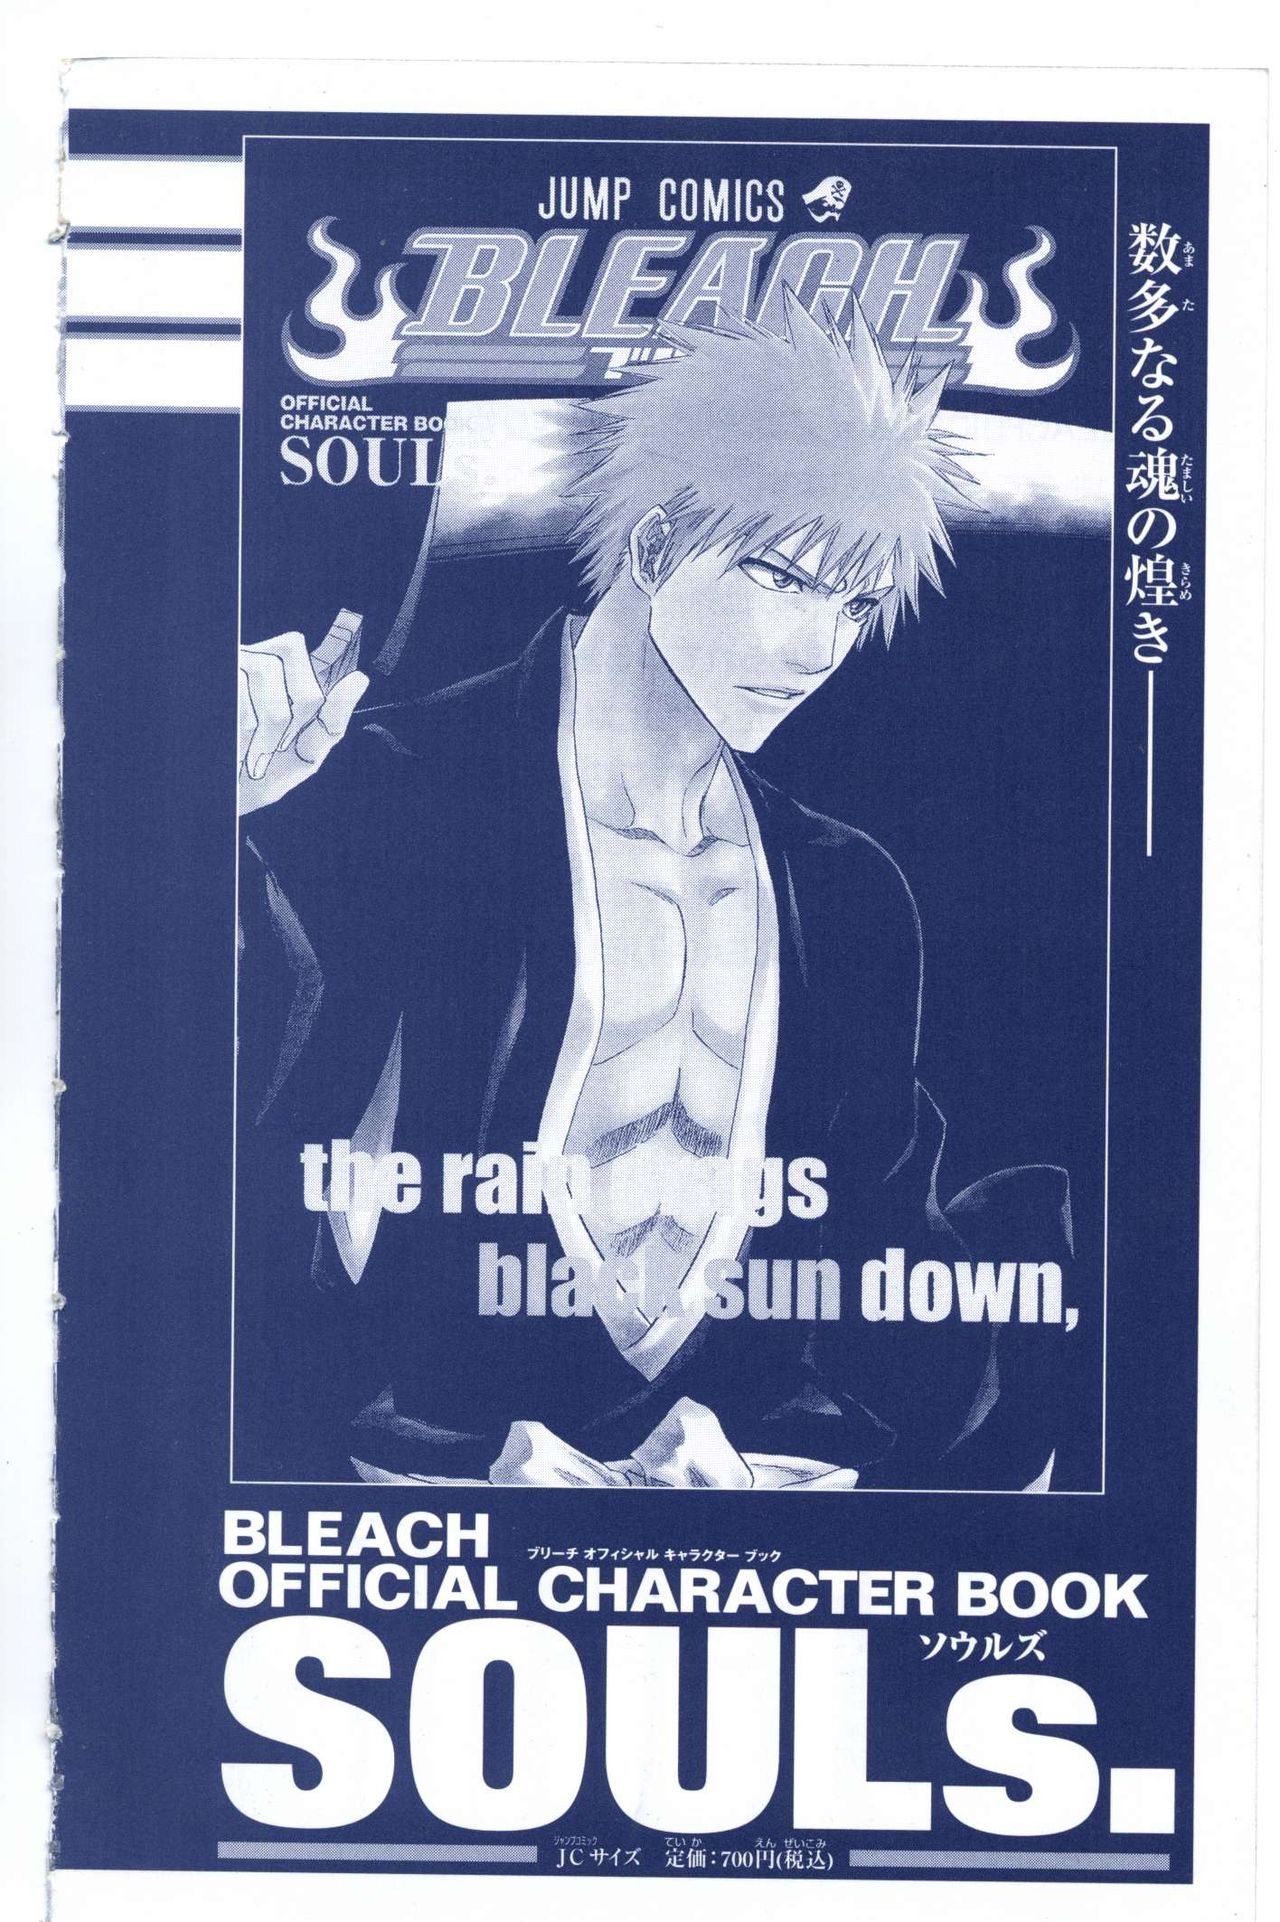 Bleach: Official Animation Book VIBEs 260